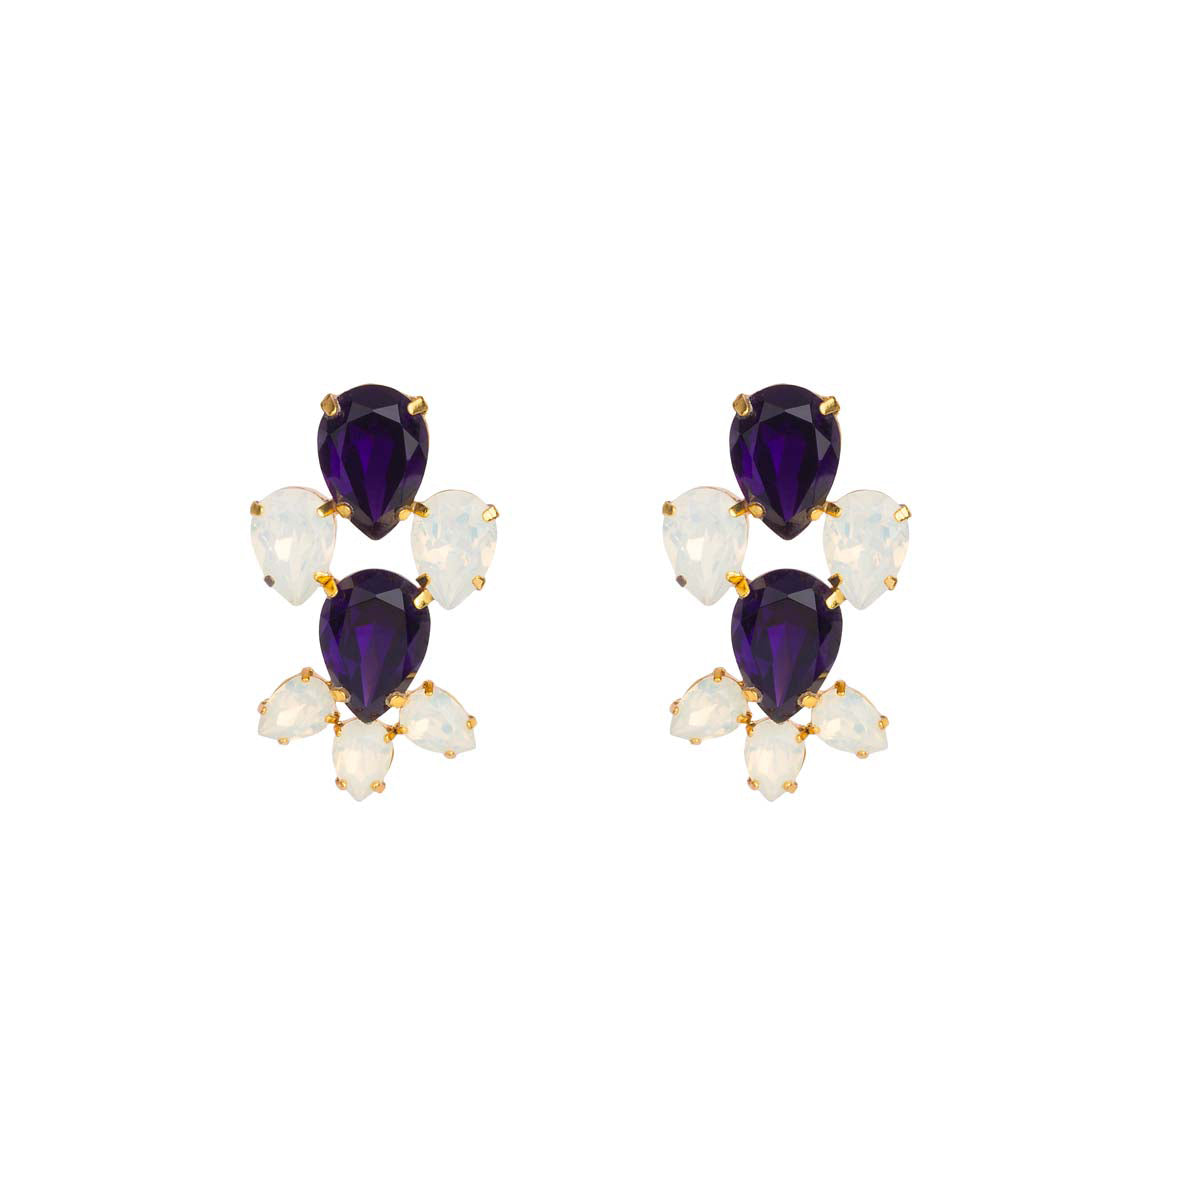 Dynamic in their dimensional design - turn your diva up with these gold plated earrings encrusted with white opal and purple Swarovski elements.